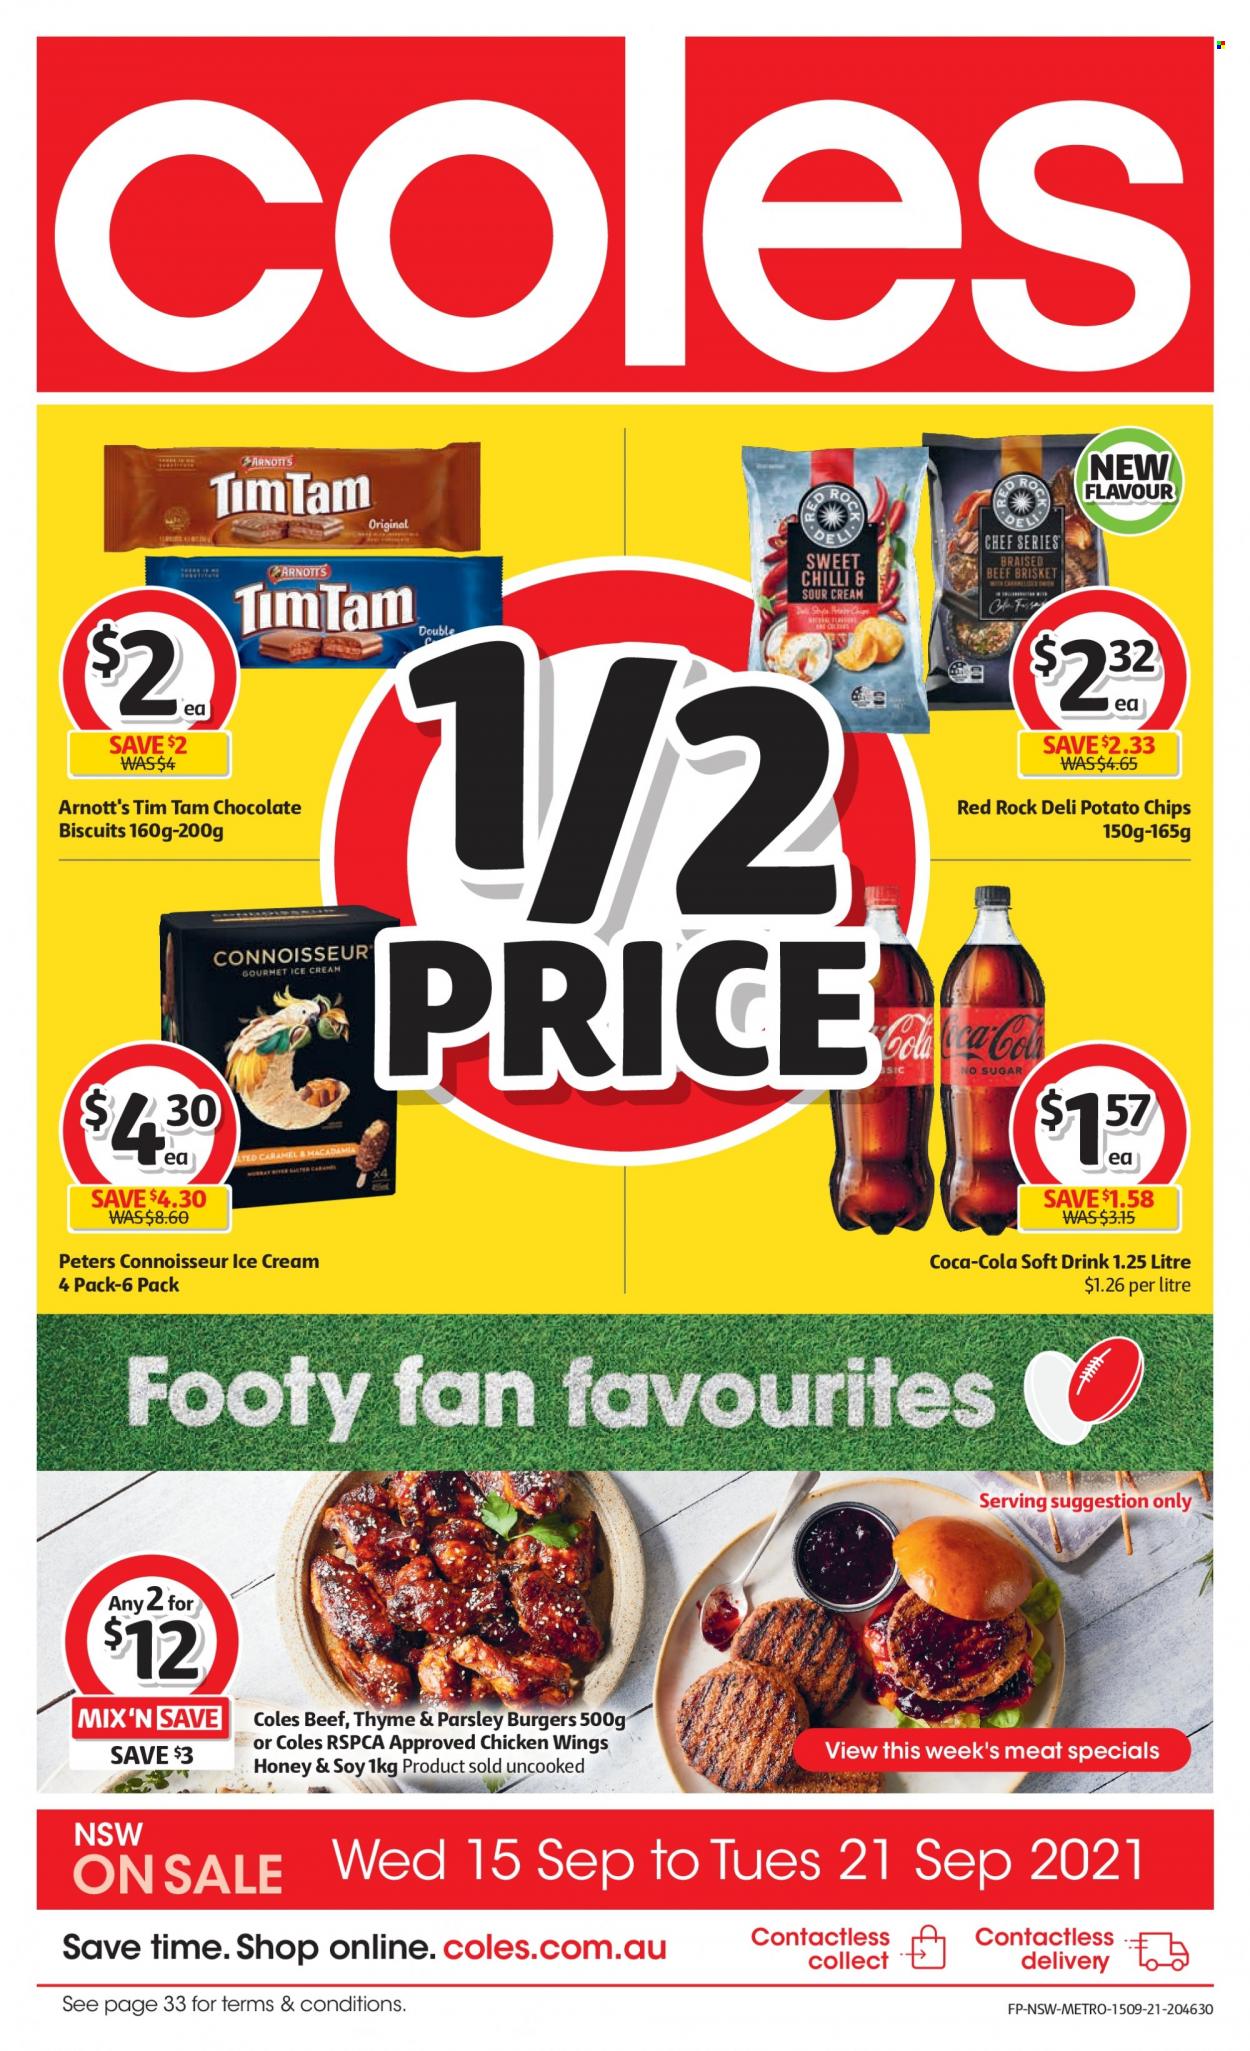 thumbnail - Coles Catalogue - 15 Sep 2021 - 21 Sep 2021 - Sales products - parsley, hamburger, ice cream, chicken wings, Tim Tam, biscuit, potato chips, chips, caramel, honey, Coca-Cola, soft drink, beef meat, beef brisket. Page 1.